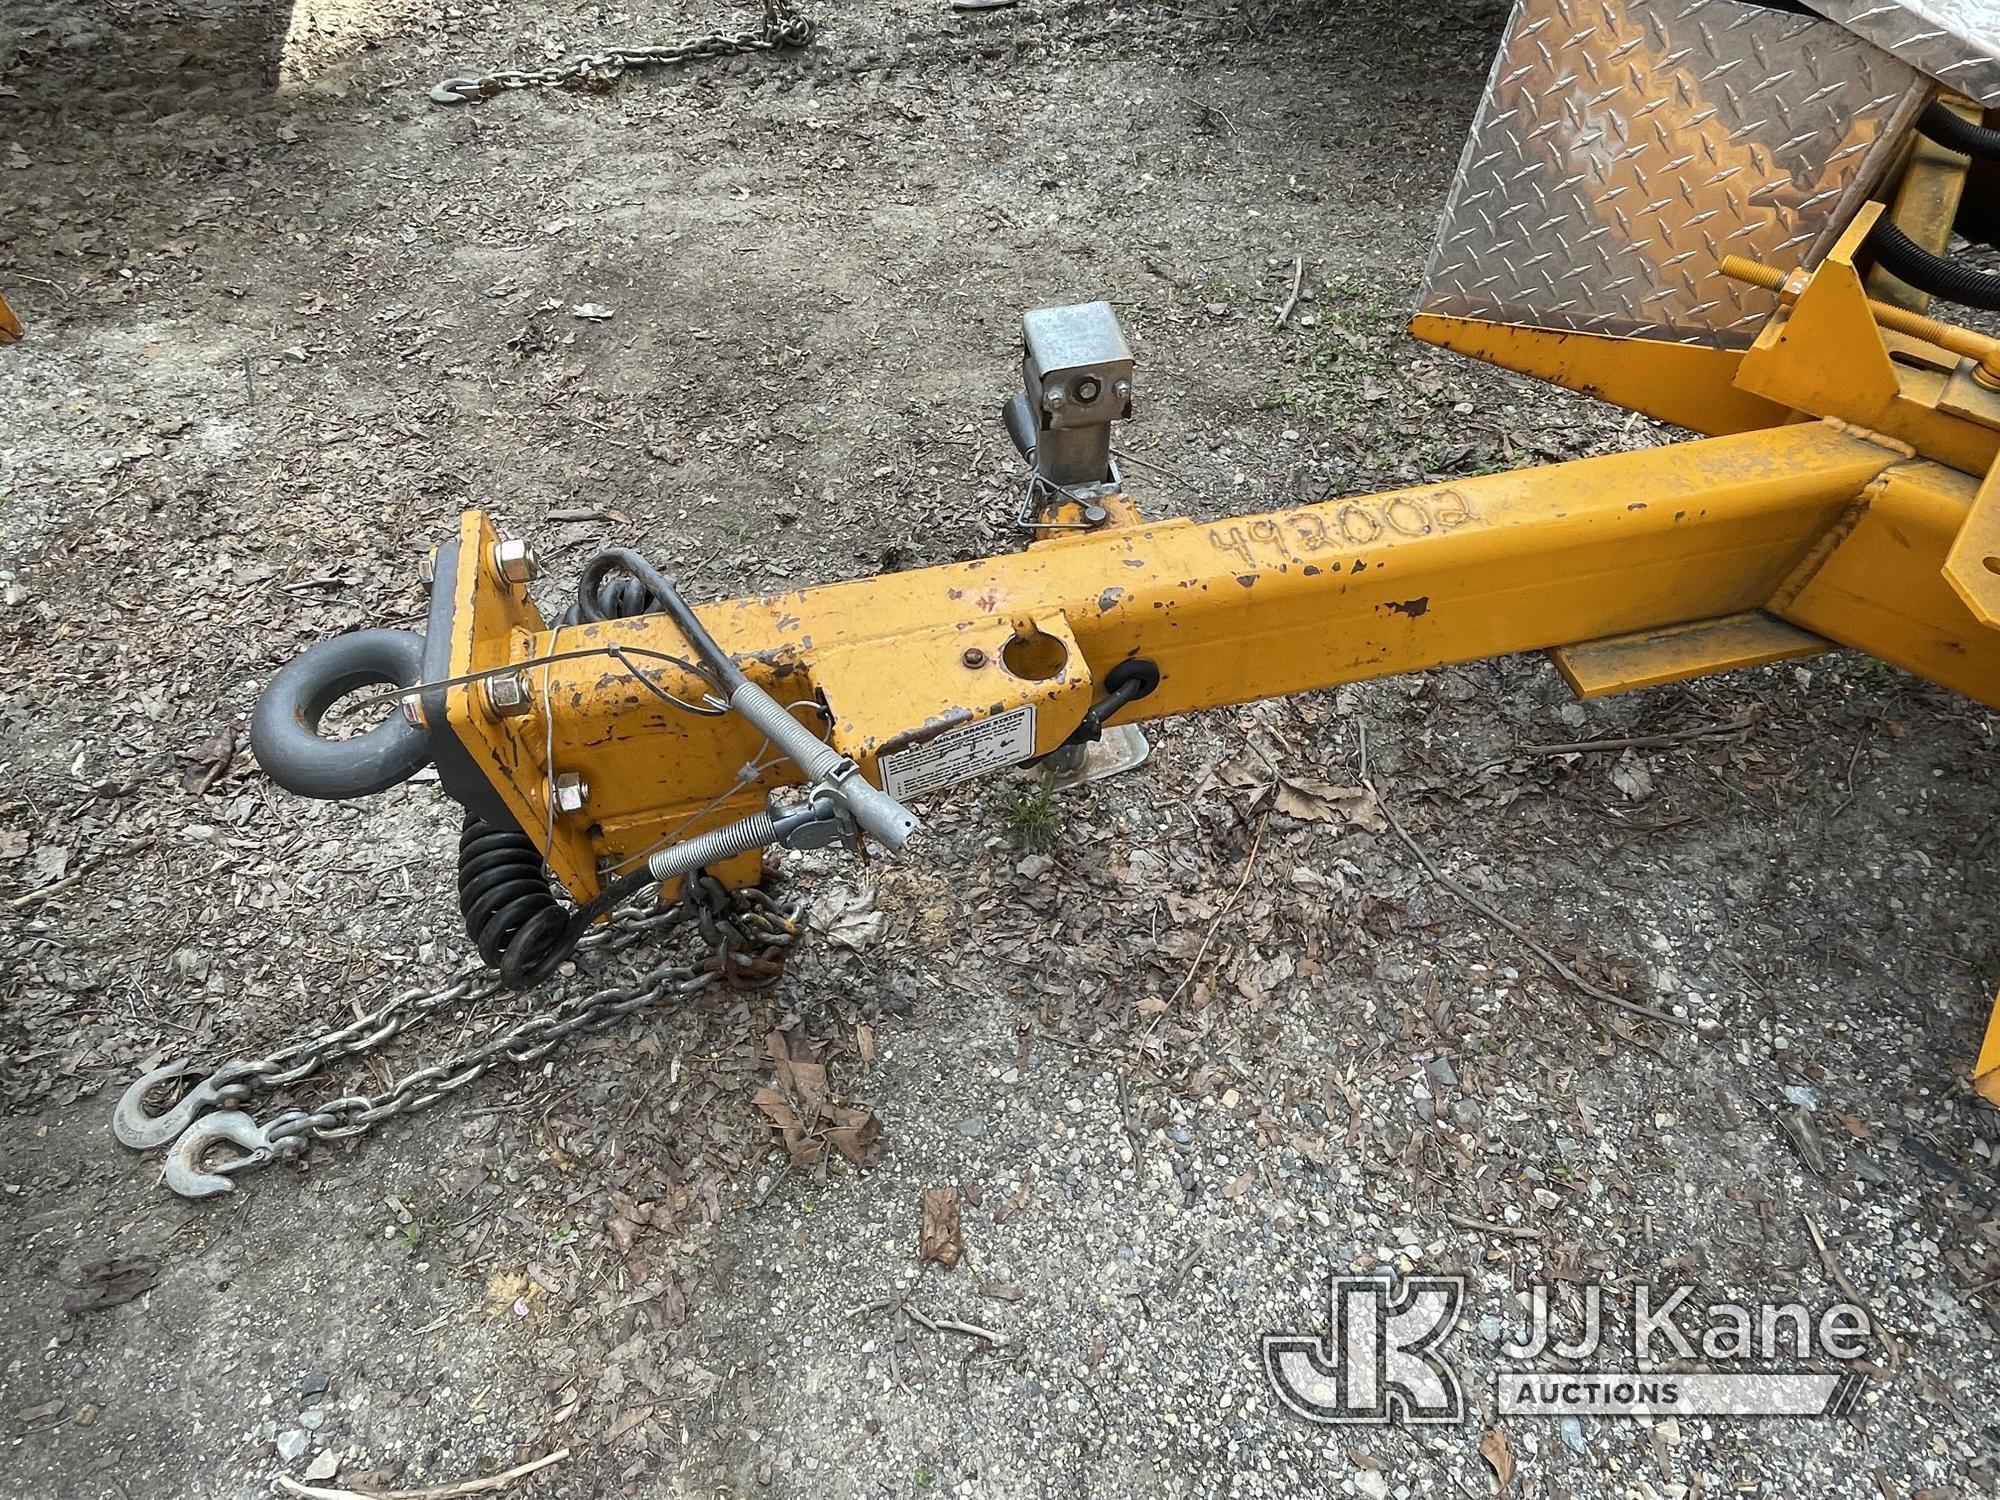 (Plymouth Meeting, PA) Bandit 200+XP Chipper (12in Disc) No Title) (Bad Ignition Runs, Must Hold Key